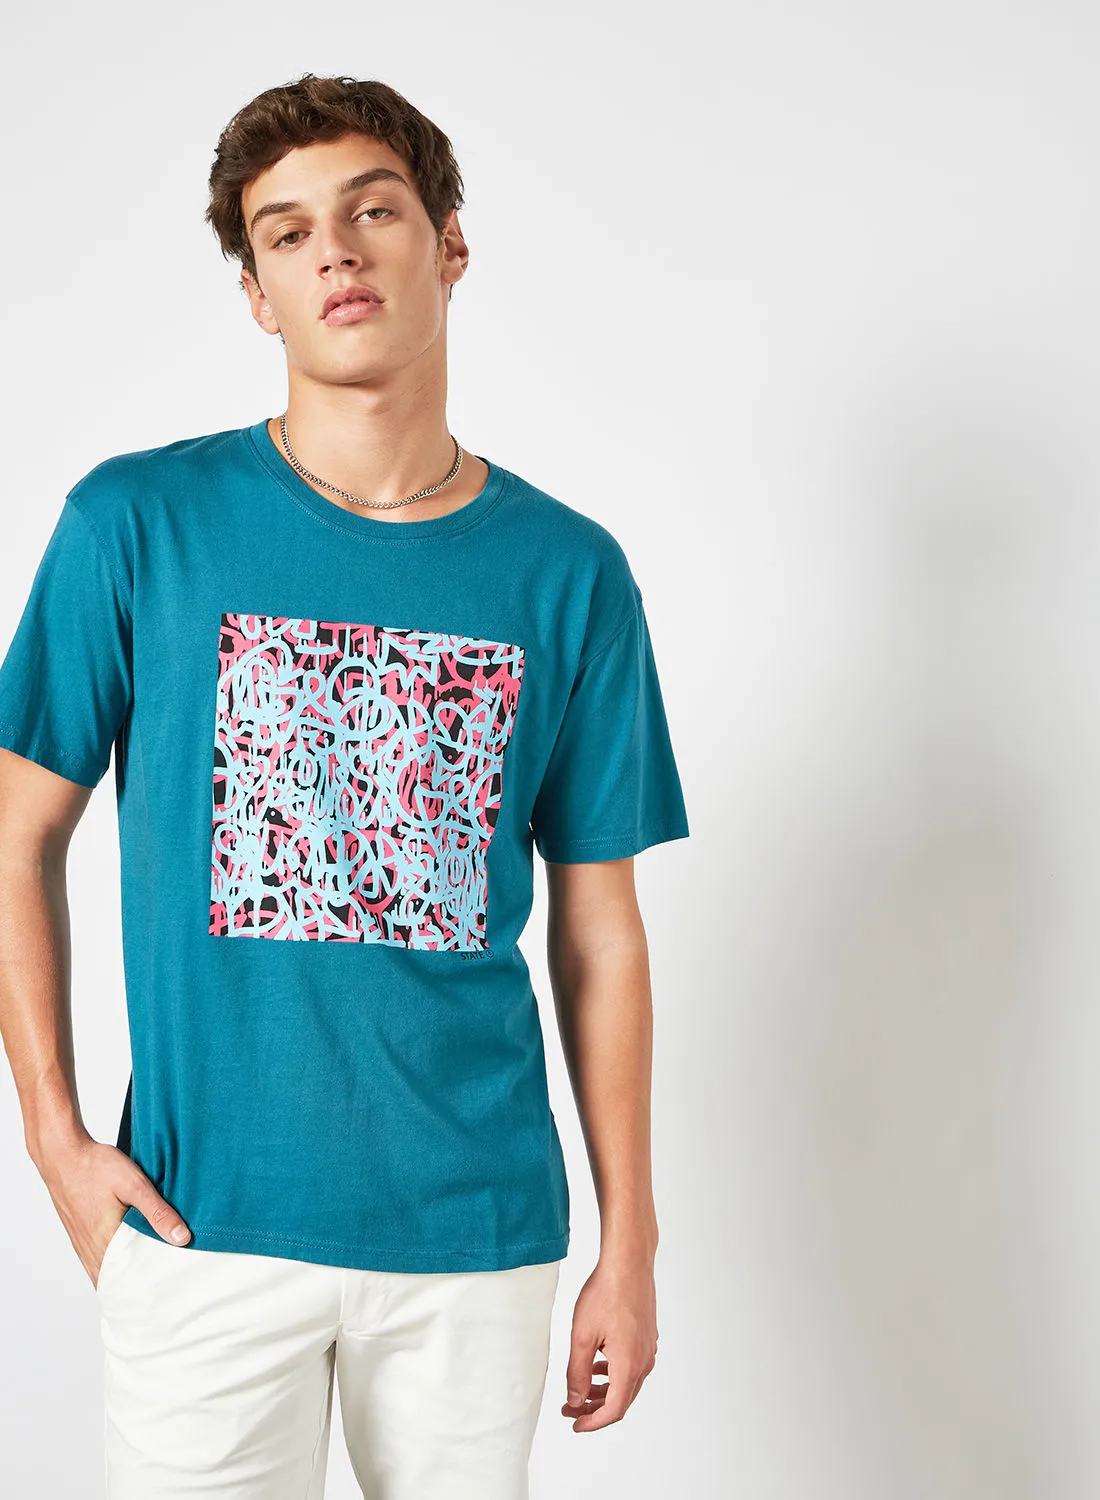 STATE 8 Graphic Print T-Shirt Blue